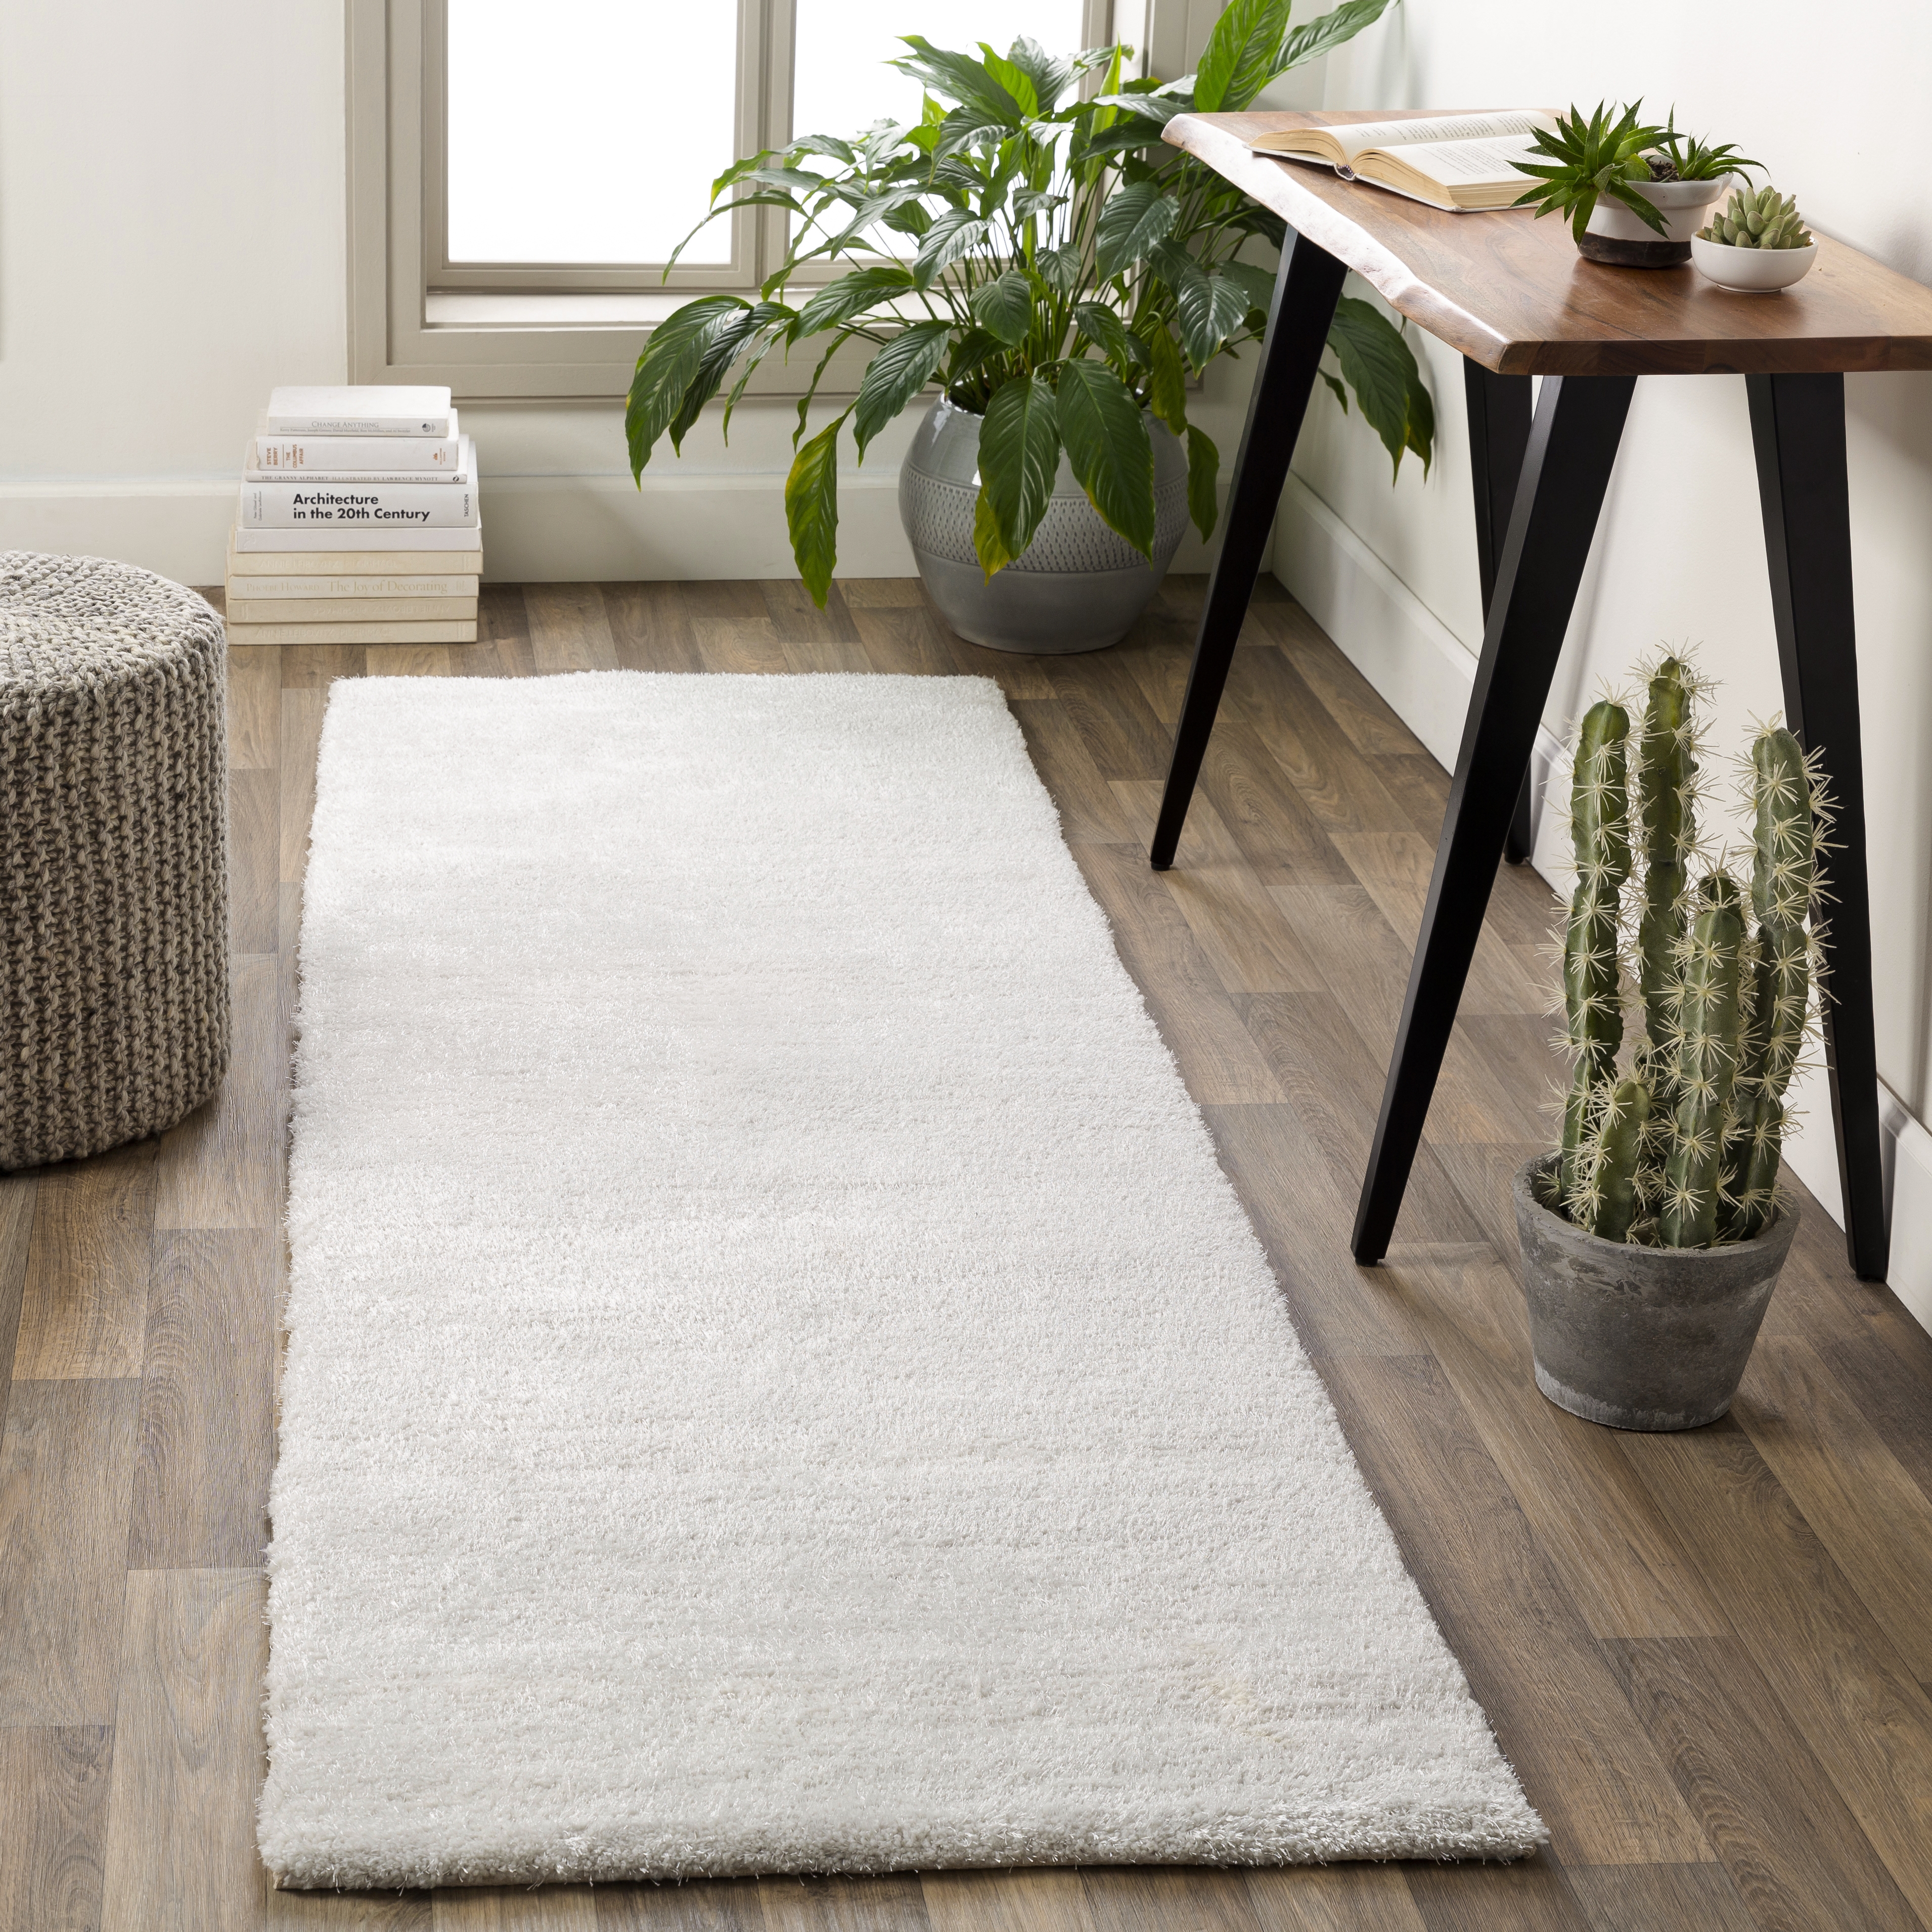 Marvin 2' x 3' Area Rug - Image 1